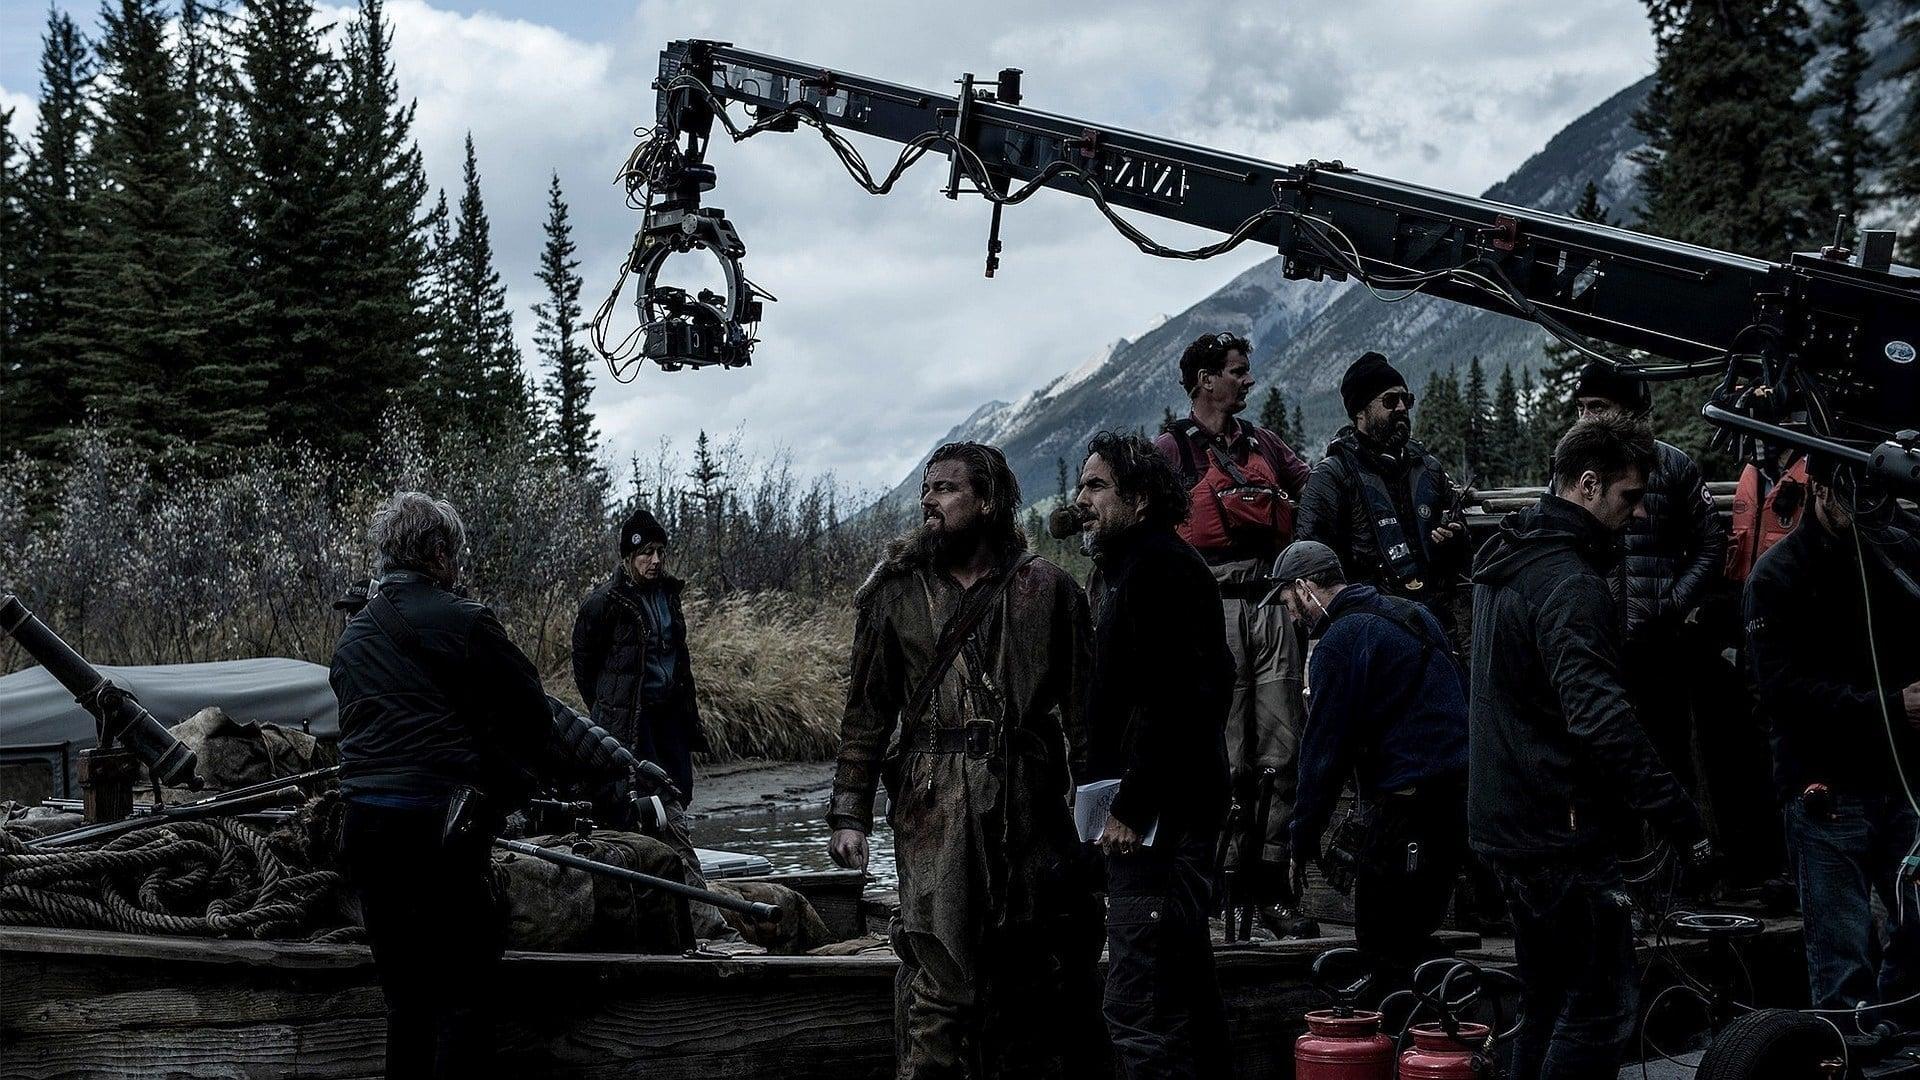 A World Unseen: 'The Revenant' backdrop